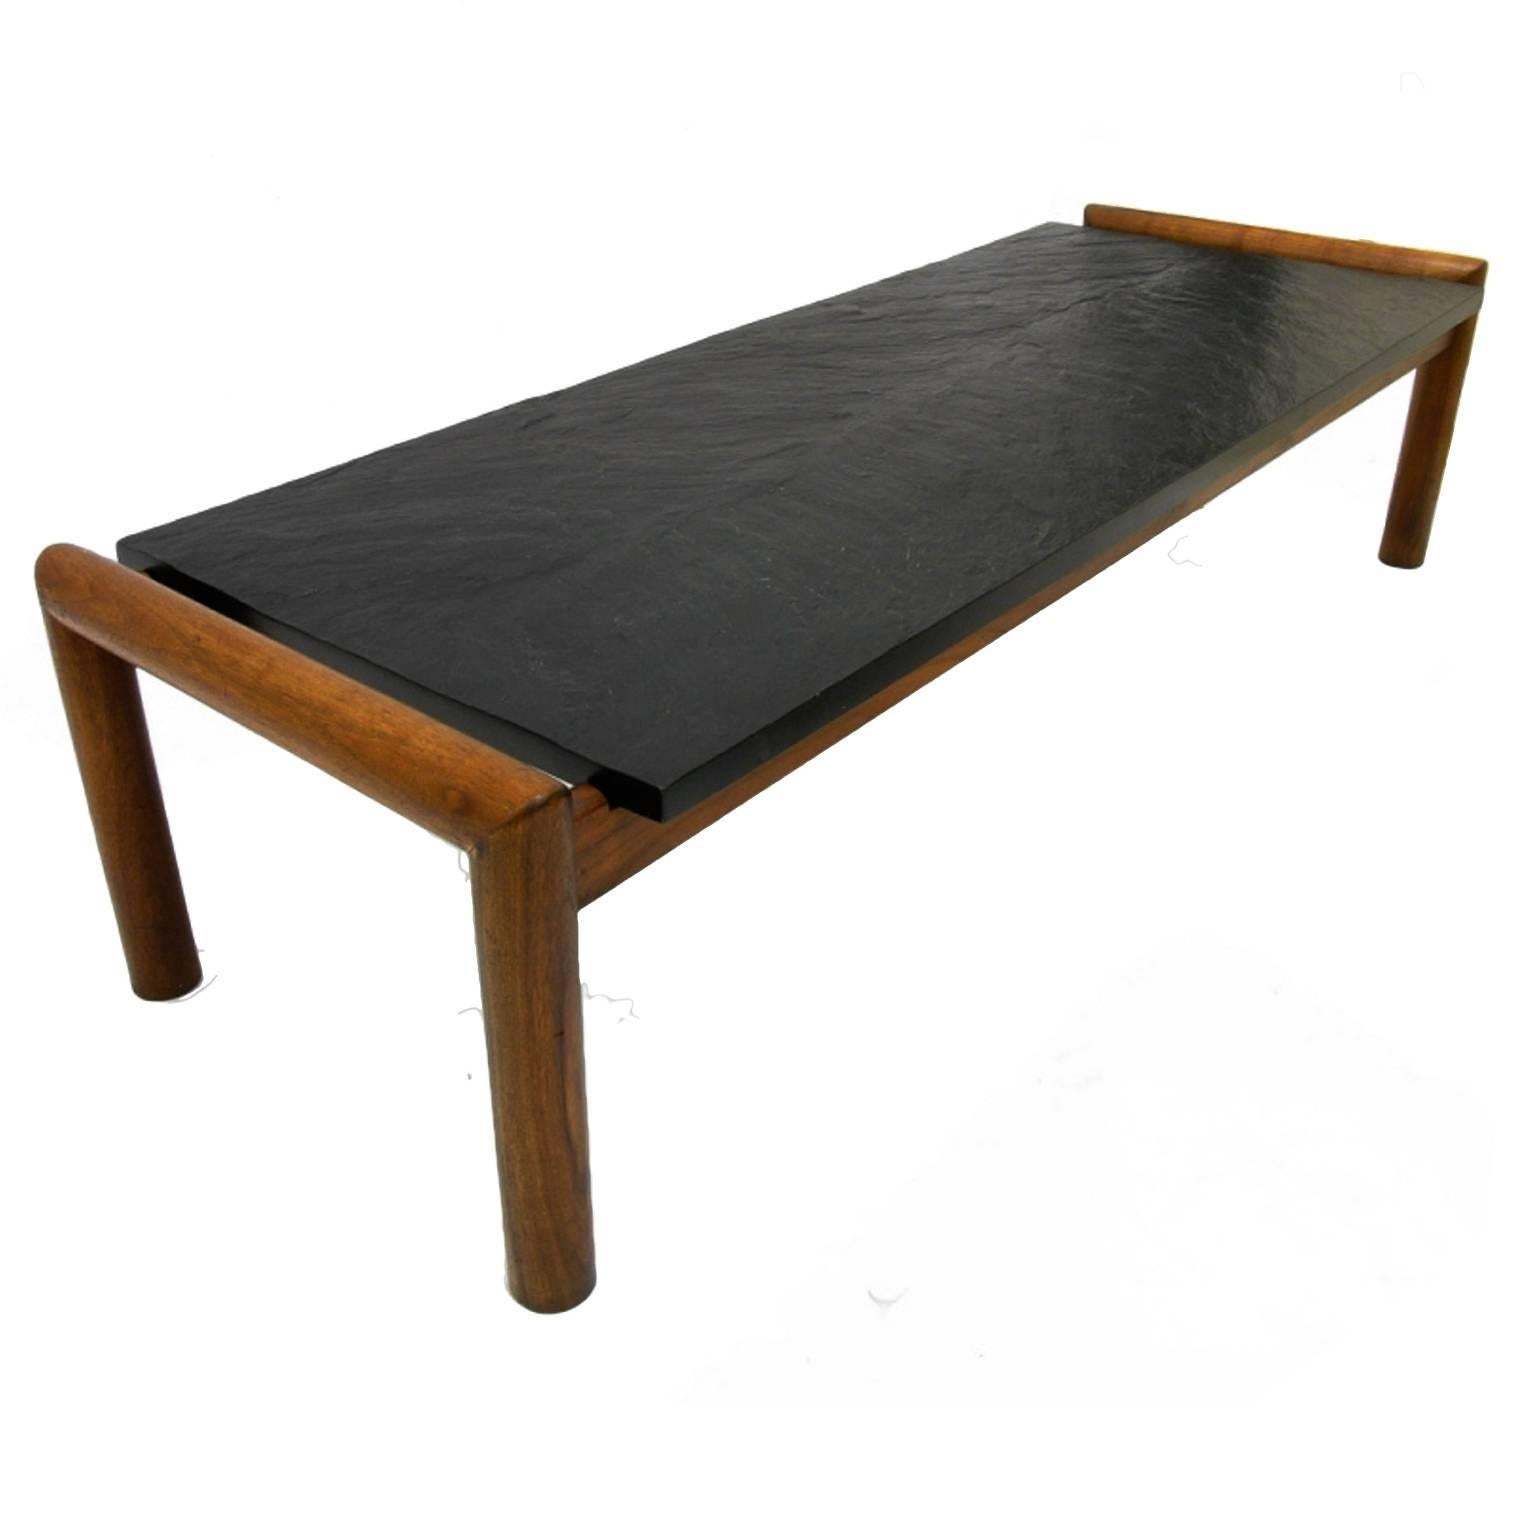 Make a statement in your living room with this very handsome Brutalist slate coffee table by designer Adrian Pearsall. The slab of natural slate is one inch thick that sits on a frame made of solid walnut.